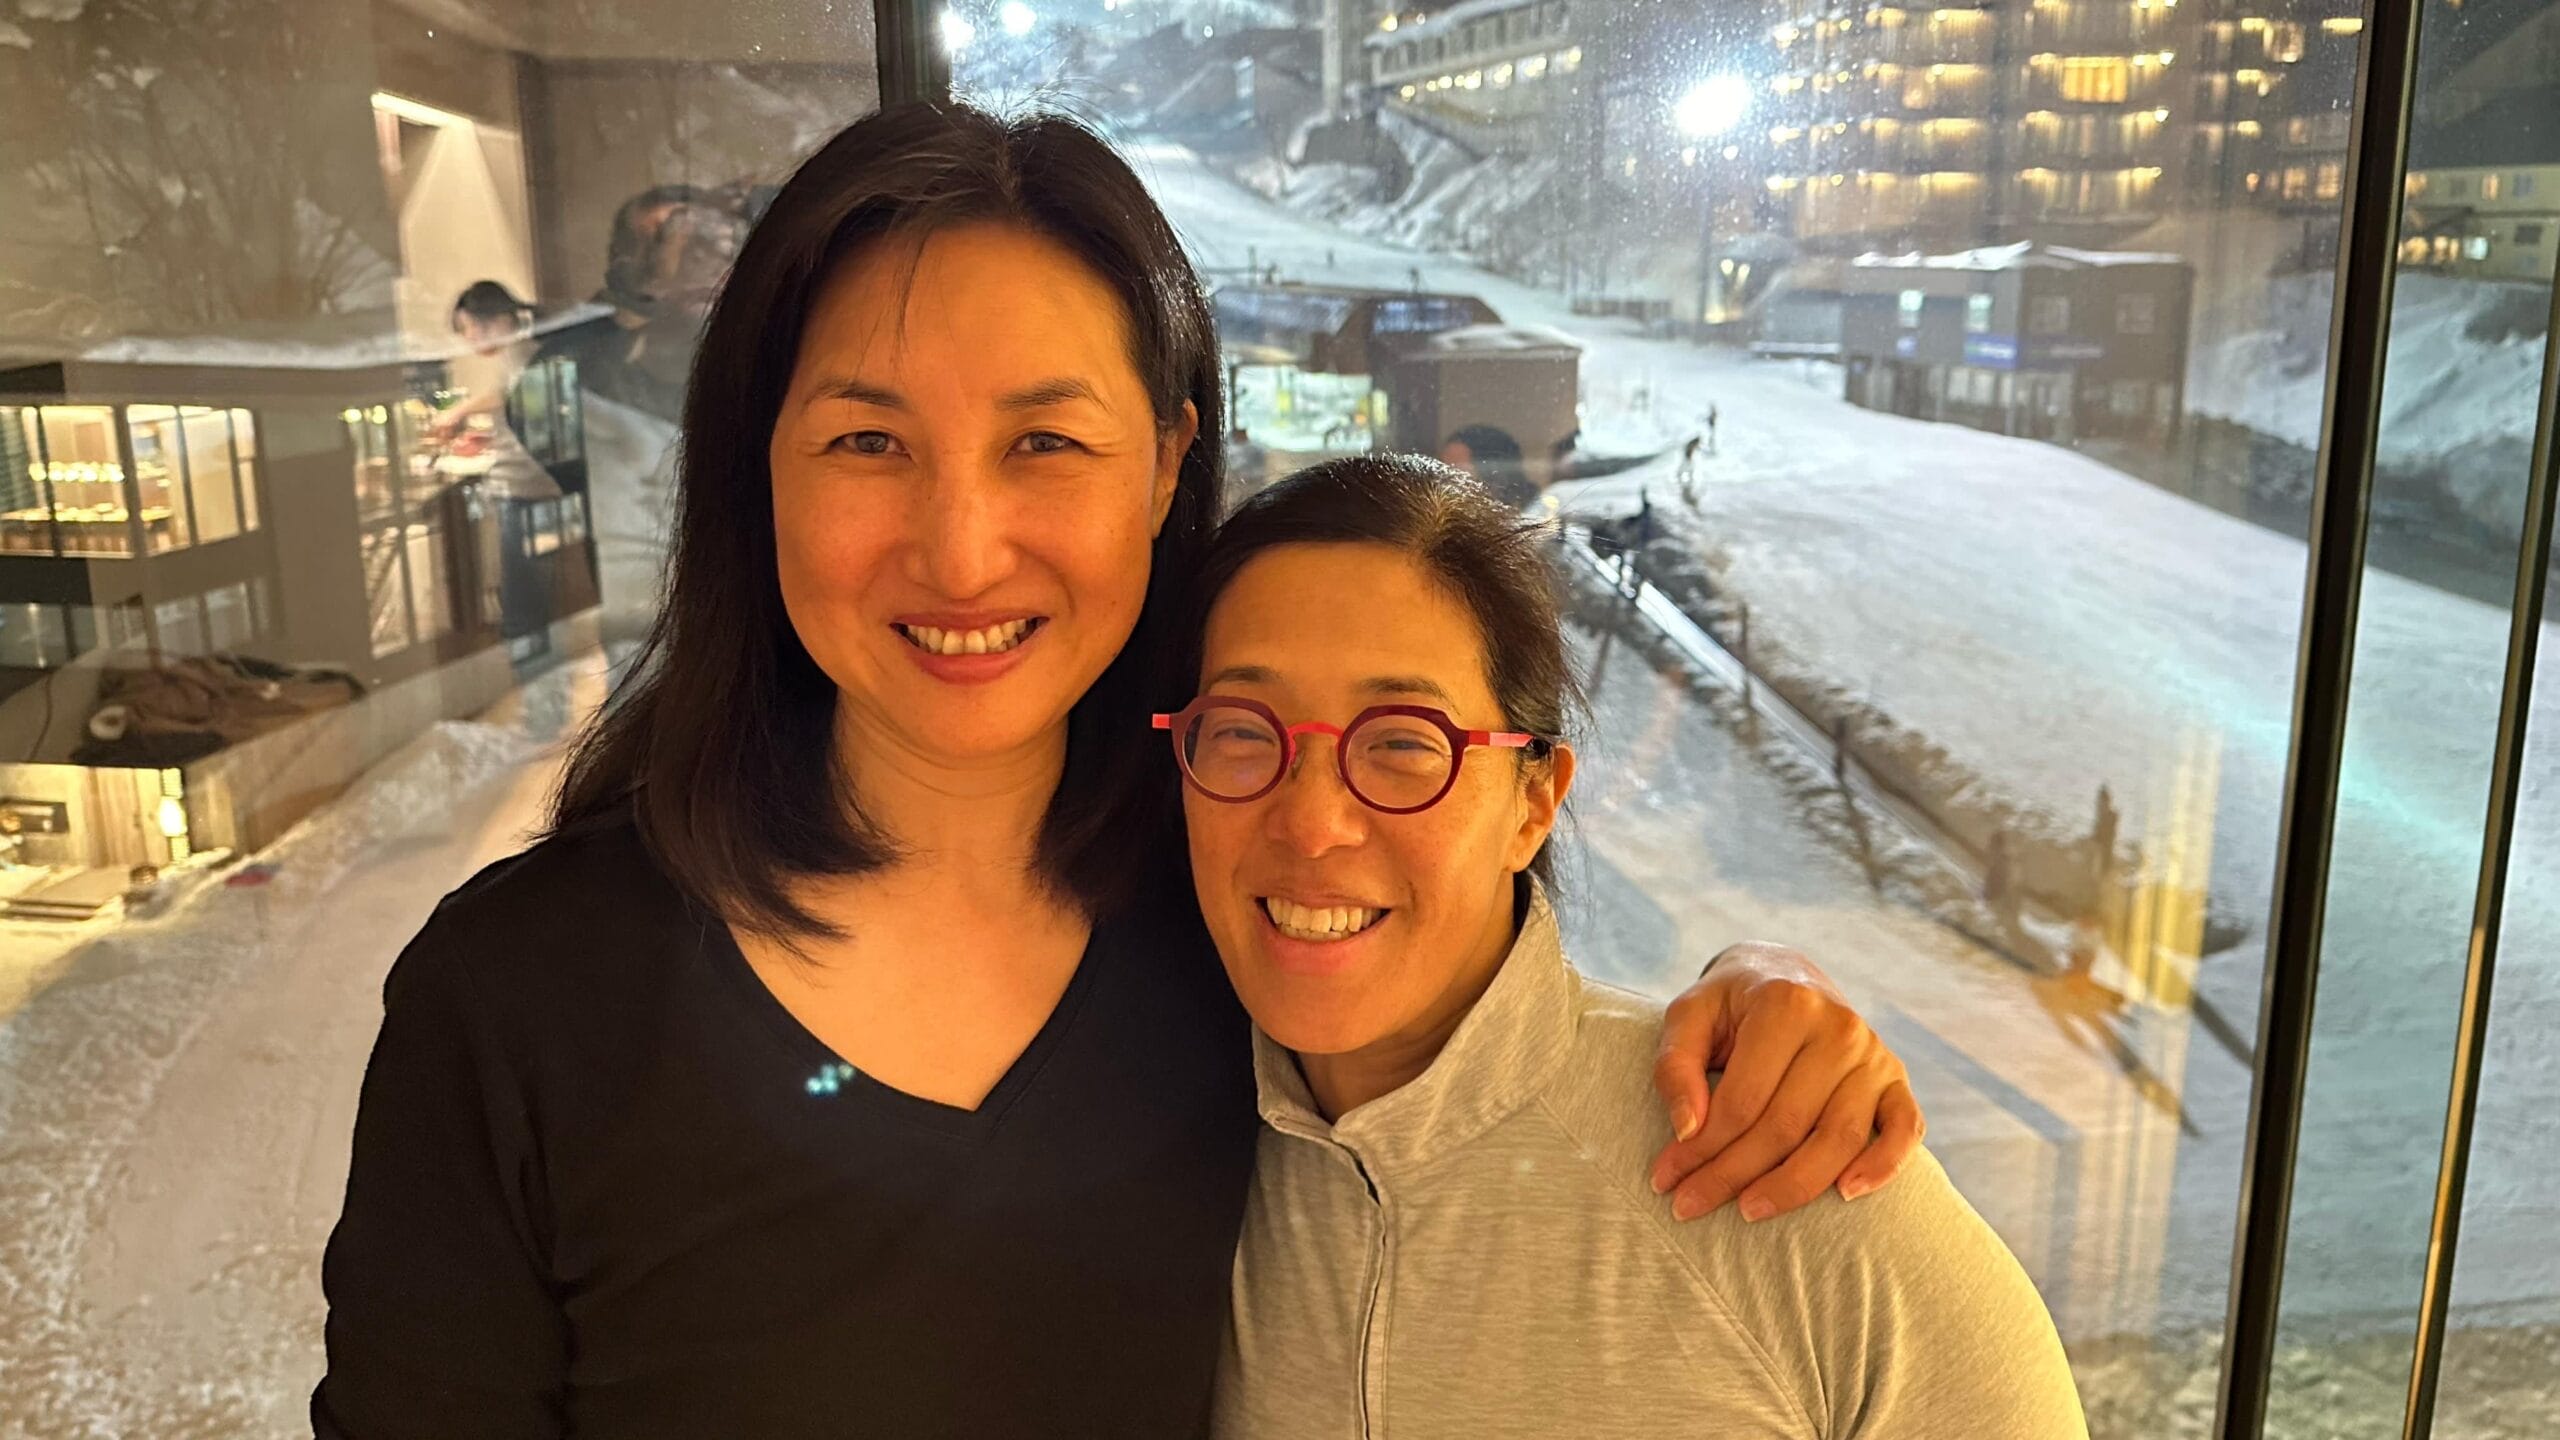 Two women pose together for a photo against a window with snow on the ground outside.